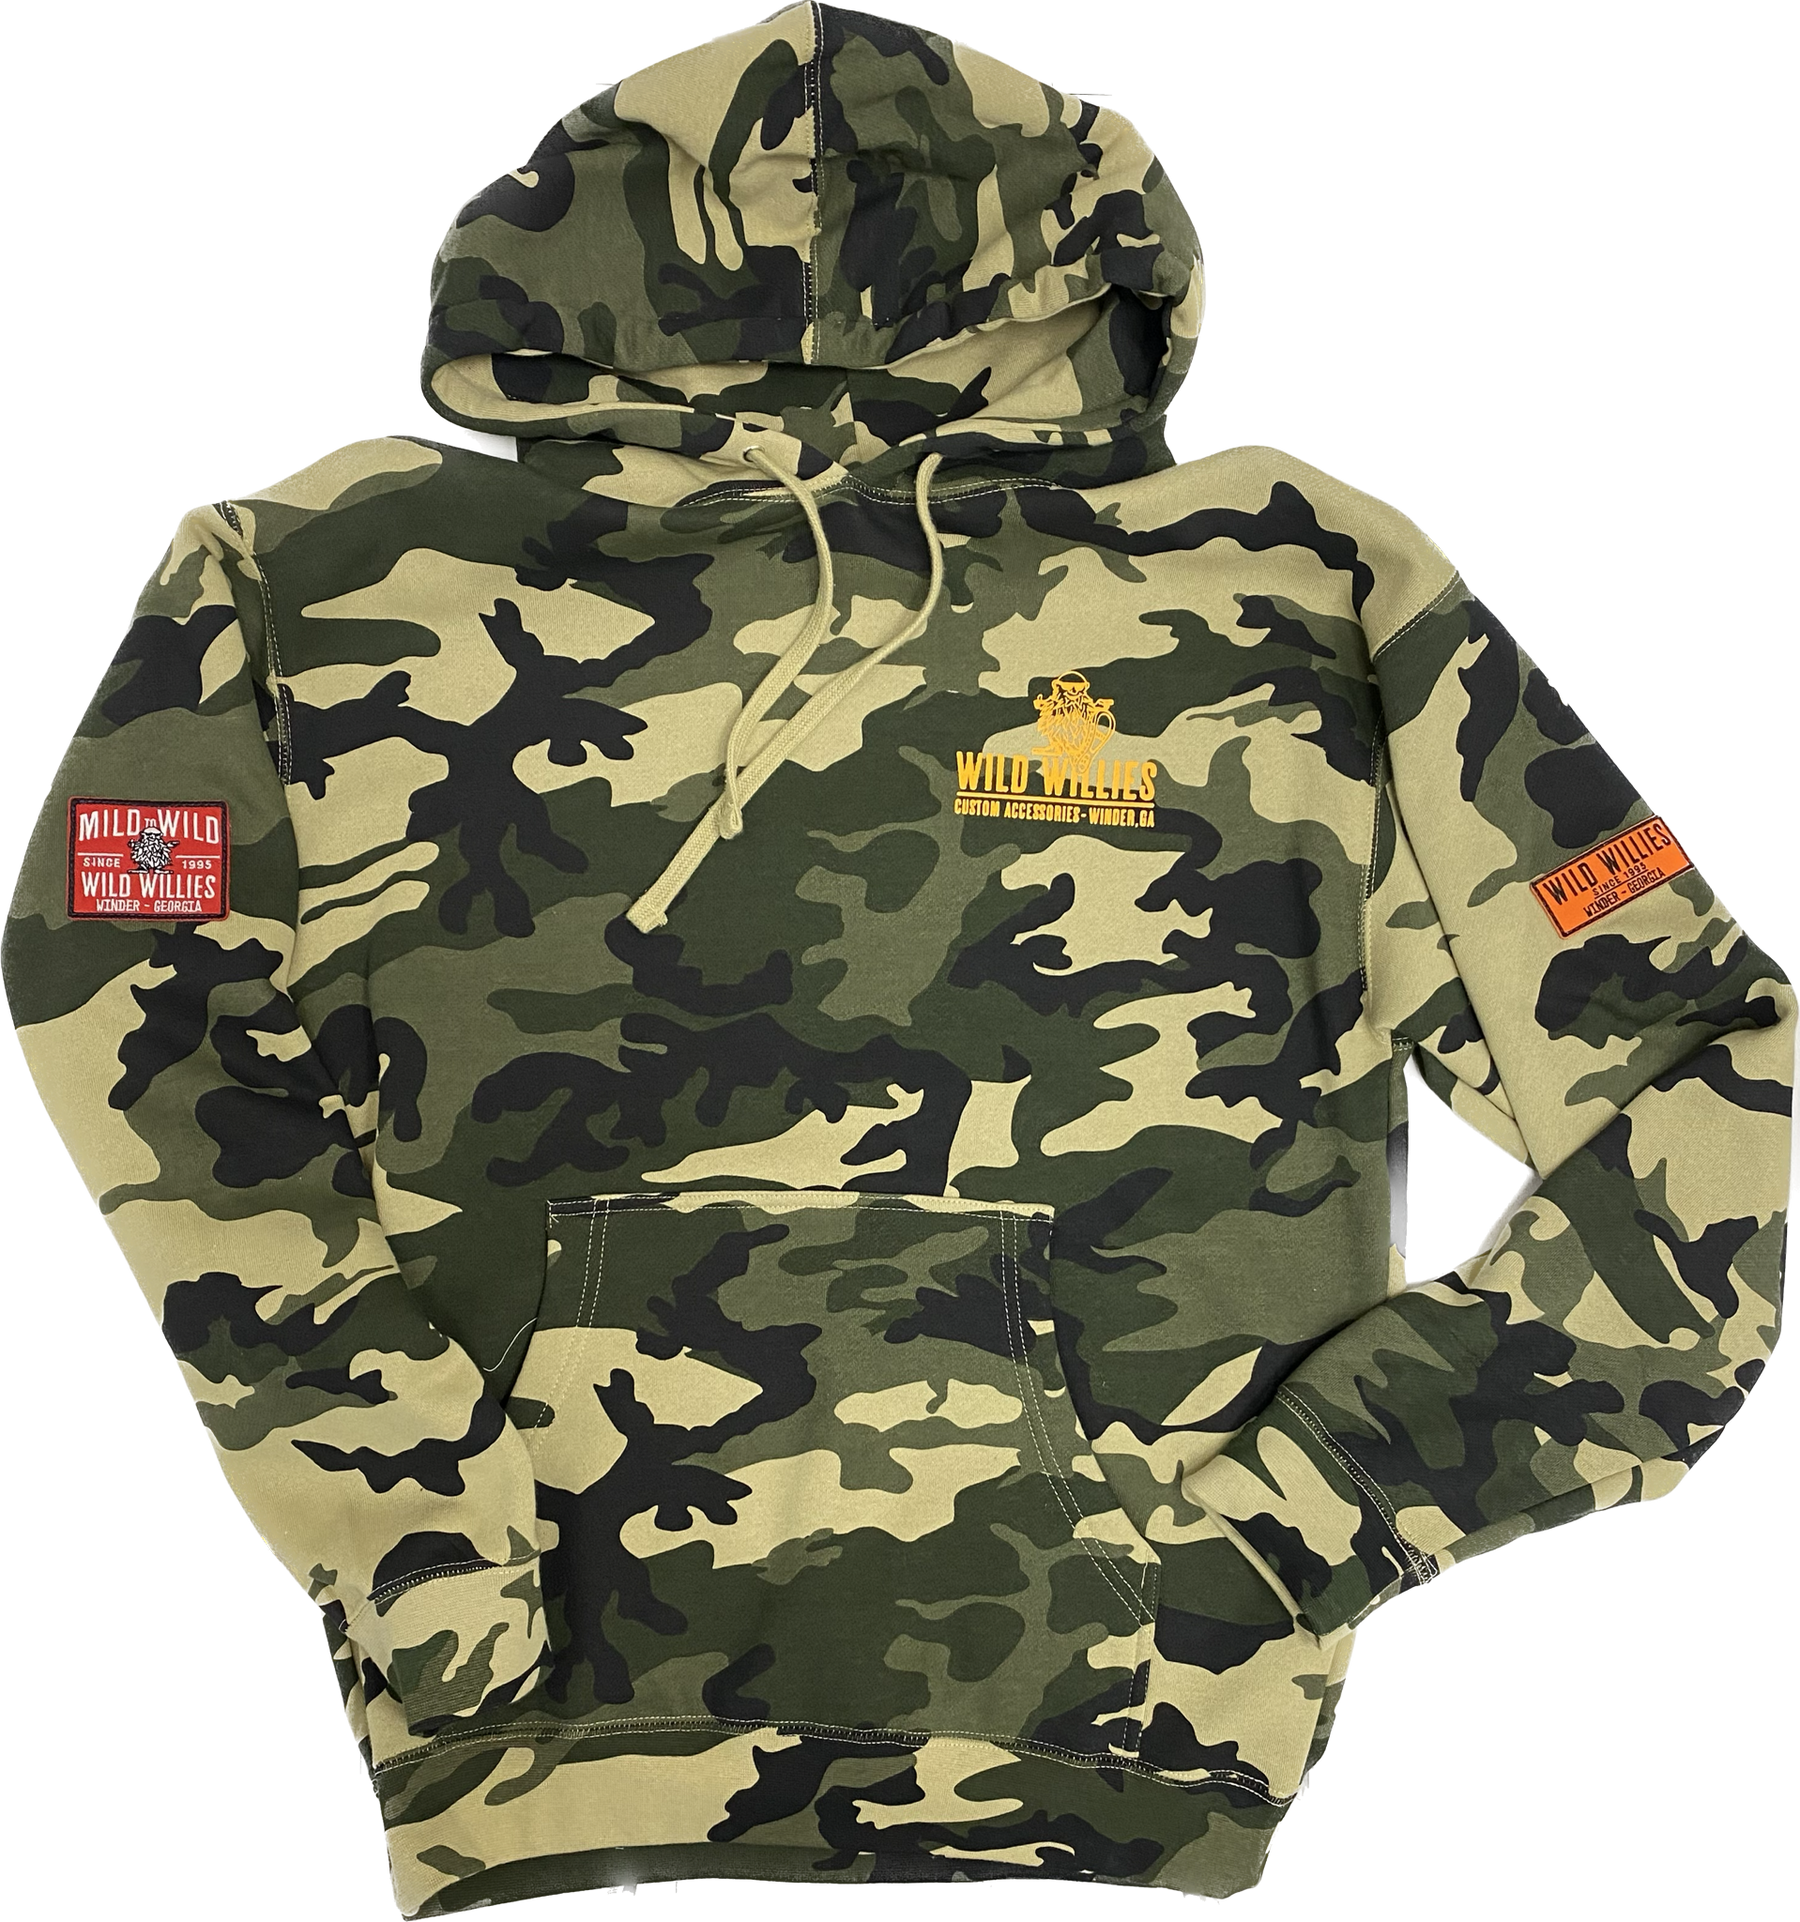 Wild Willies Limited Edition Hoodie- Camo Green